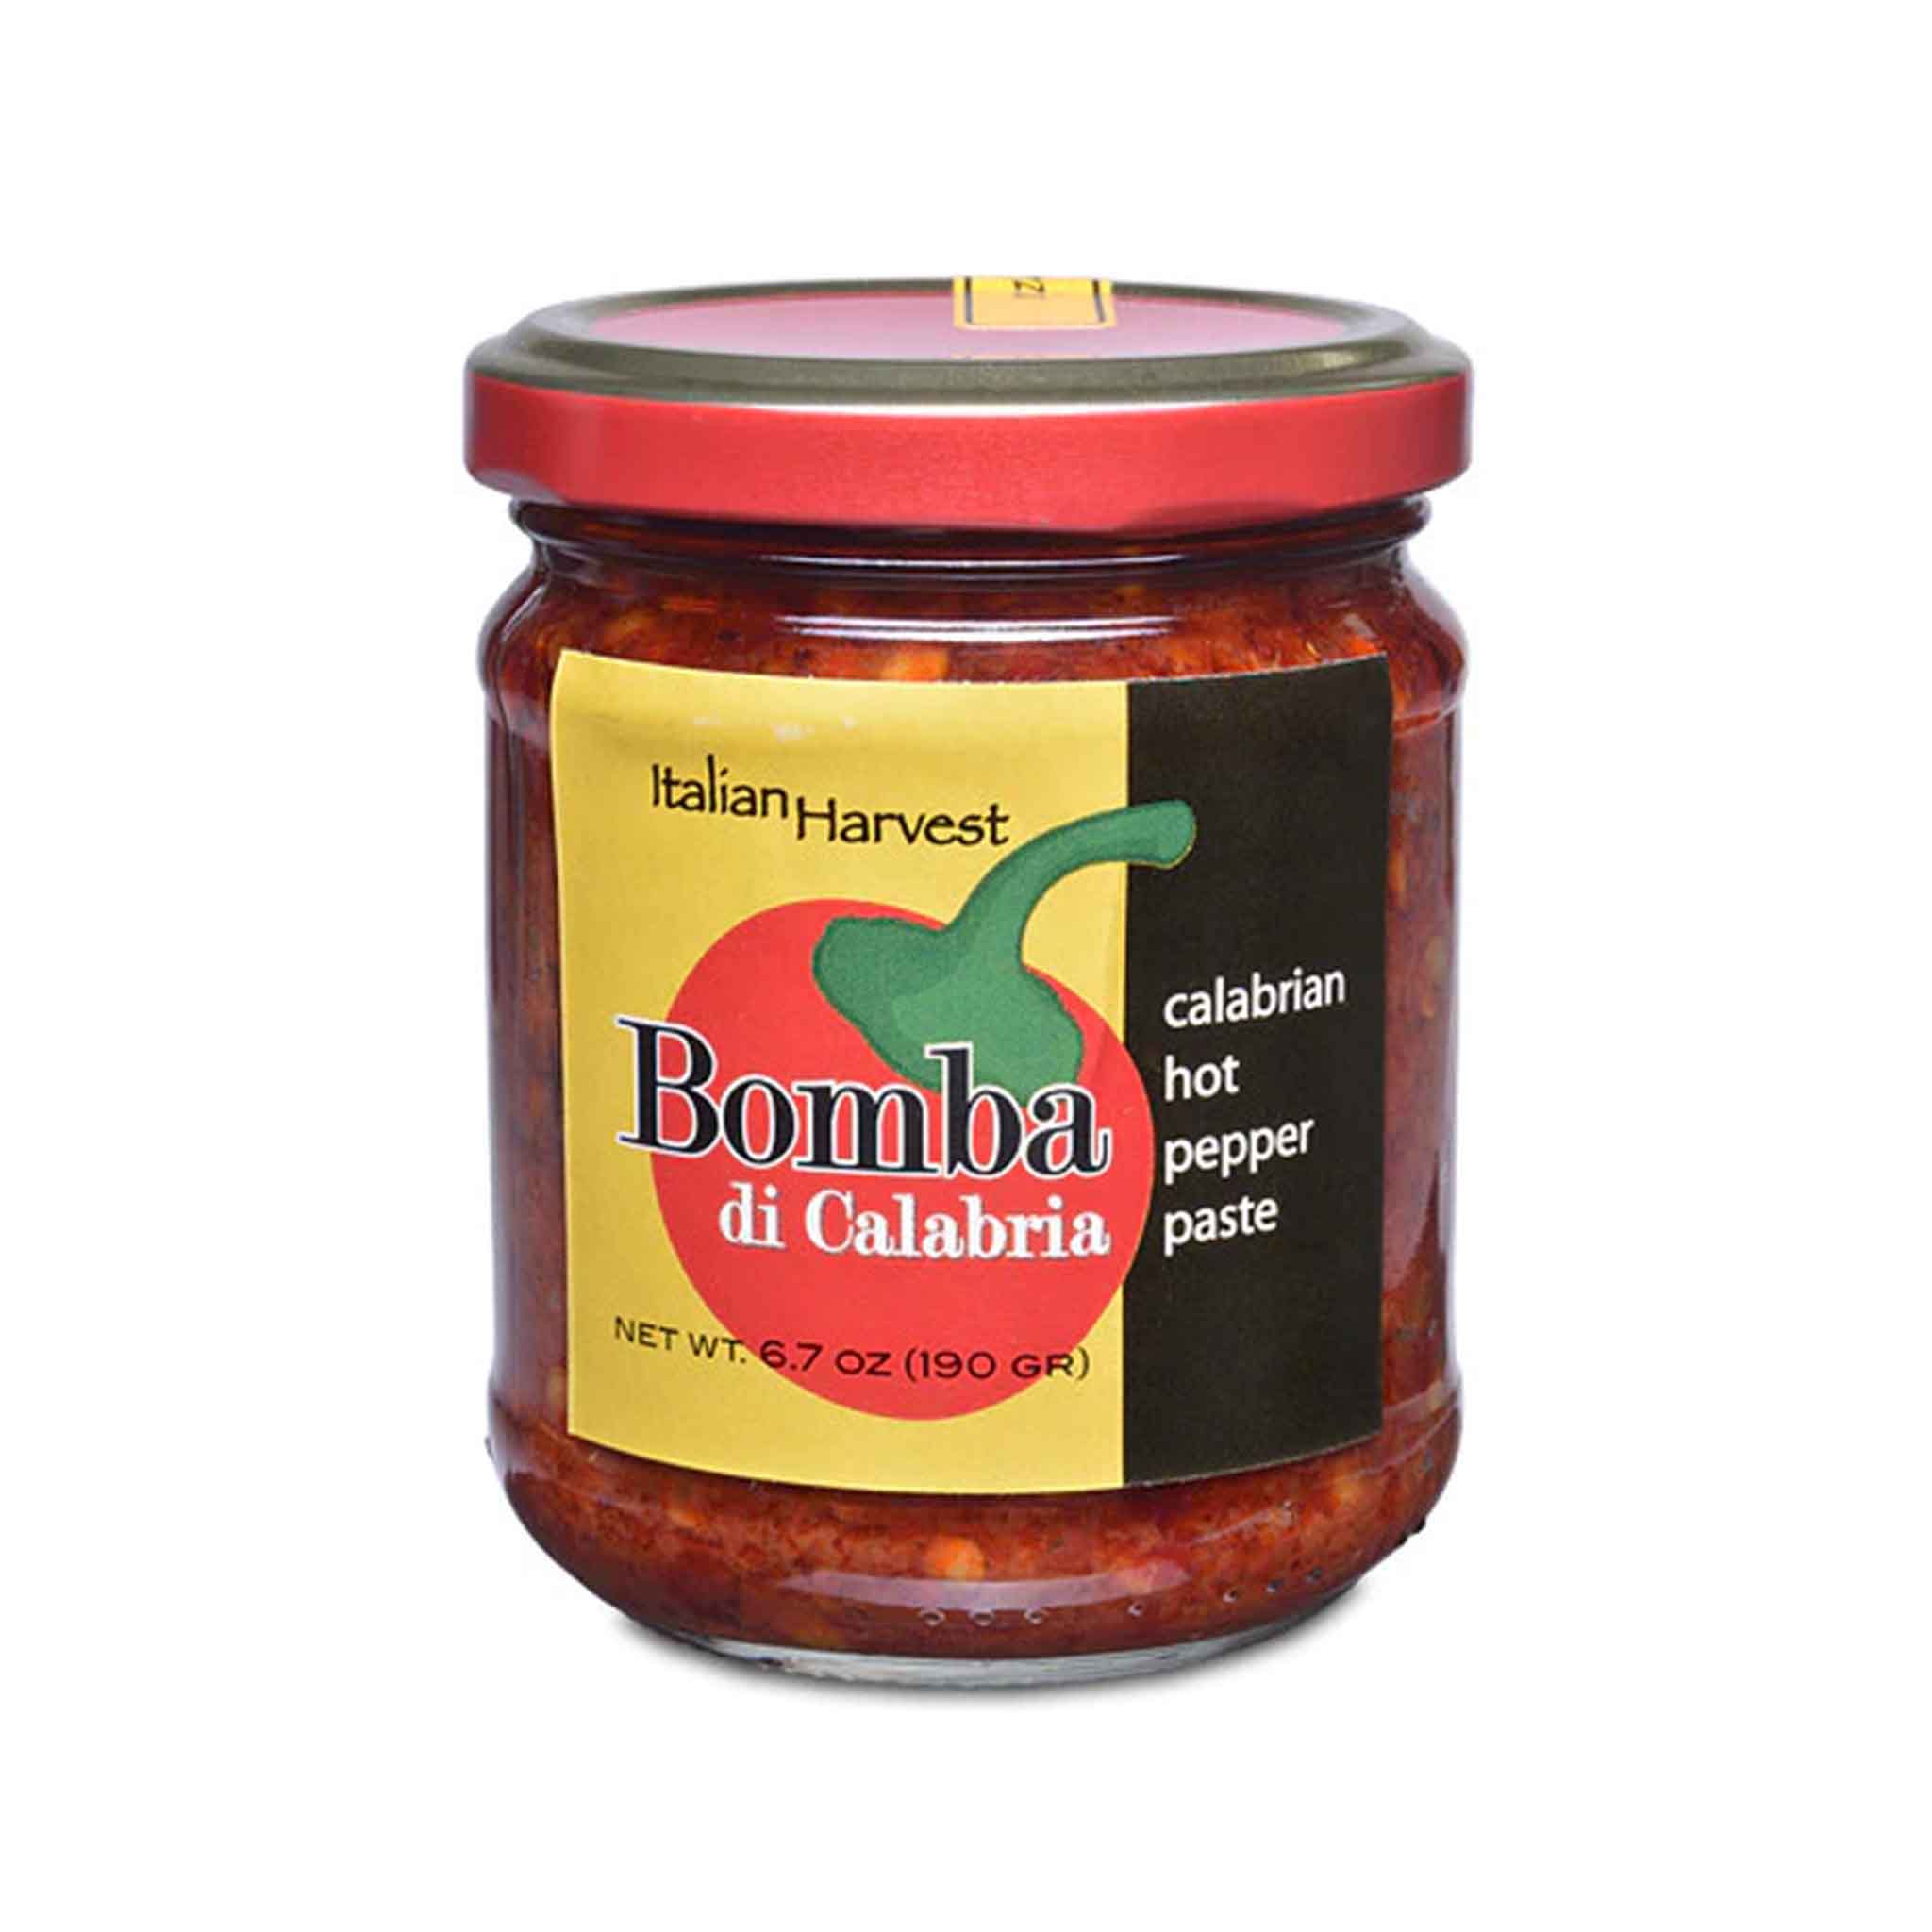 Bomba Calabrian Hot Pepper Paste 